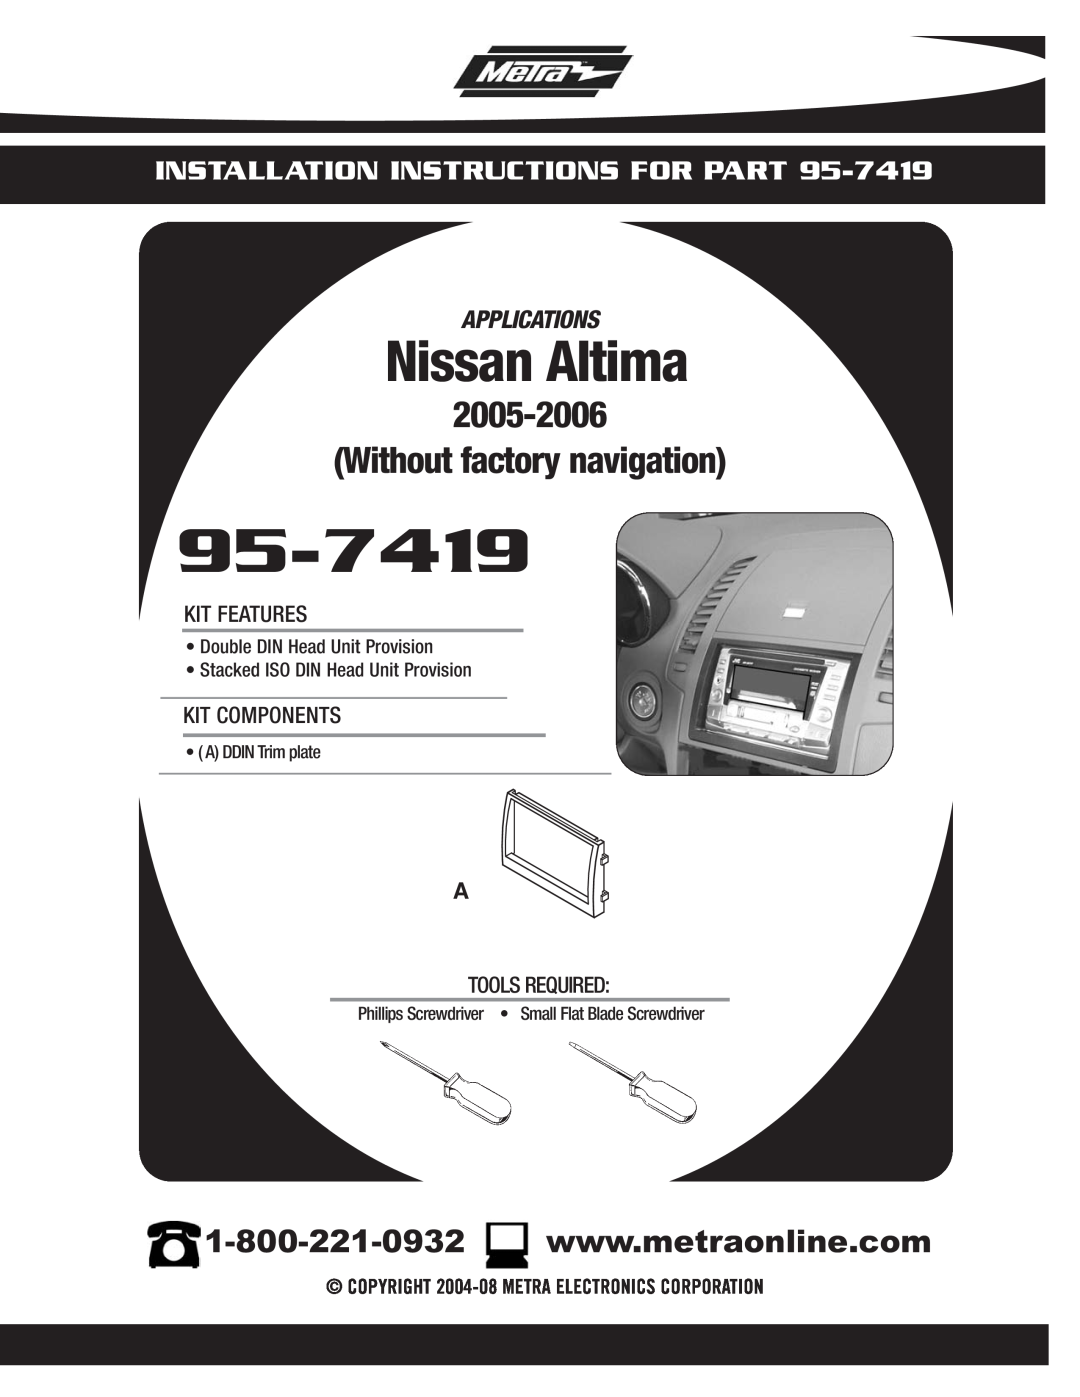 Metra Electronics 95-7419 installation instructions Nissan Altima, Without factory navigation, Applications, Kit Features 